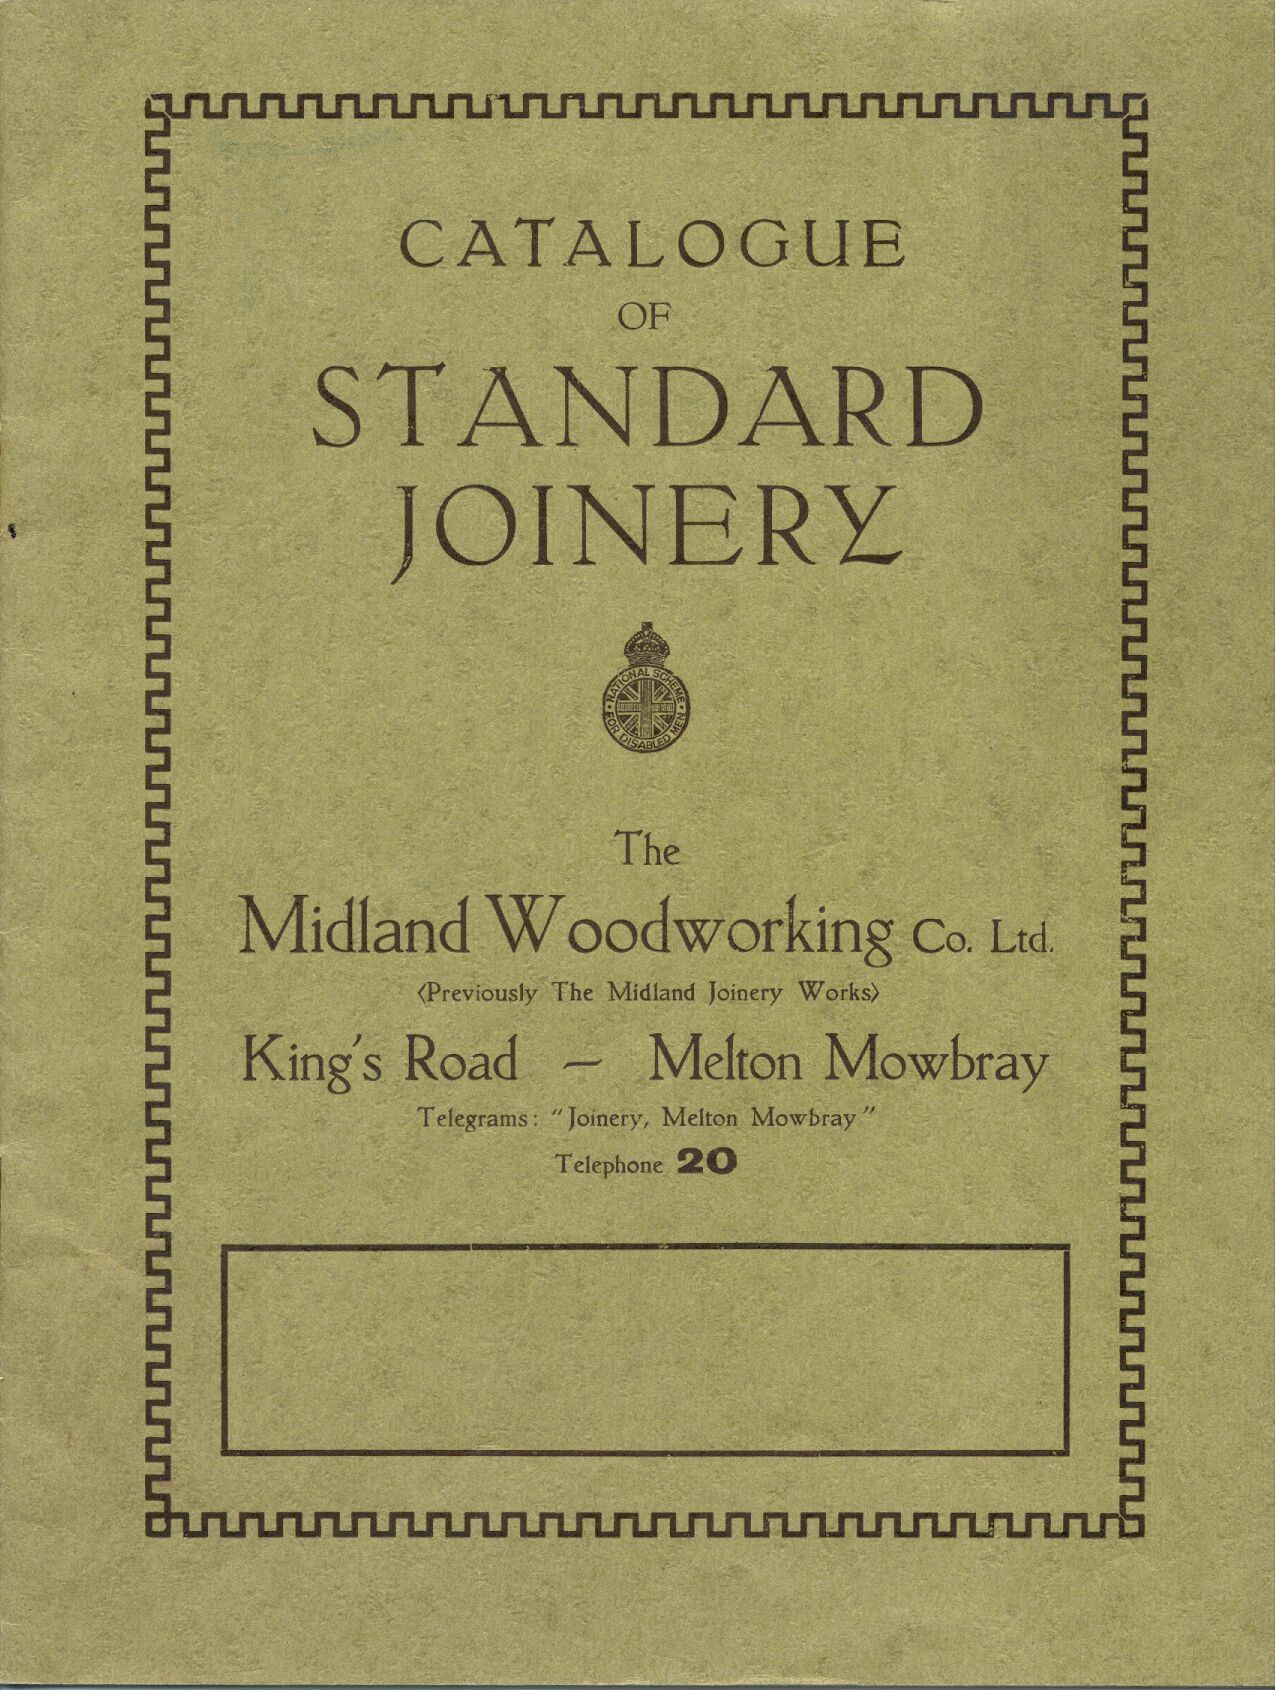 Catalogue of Standard Joinery